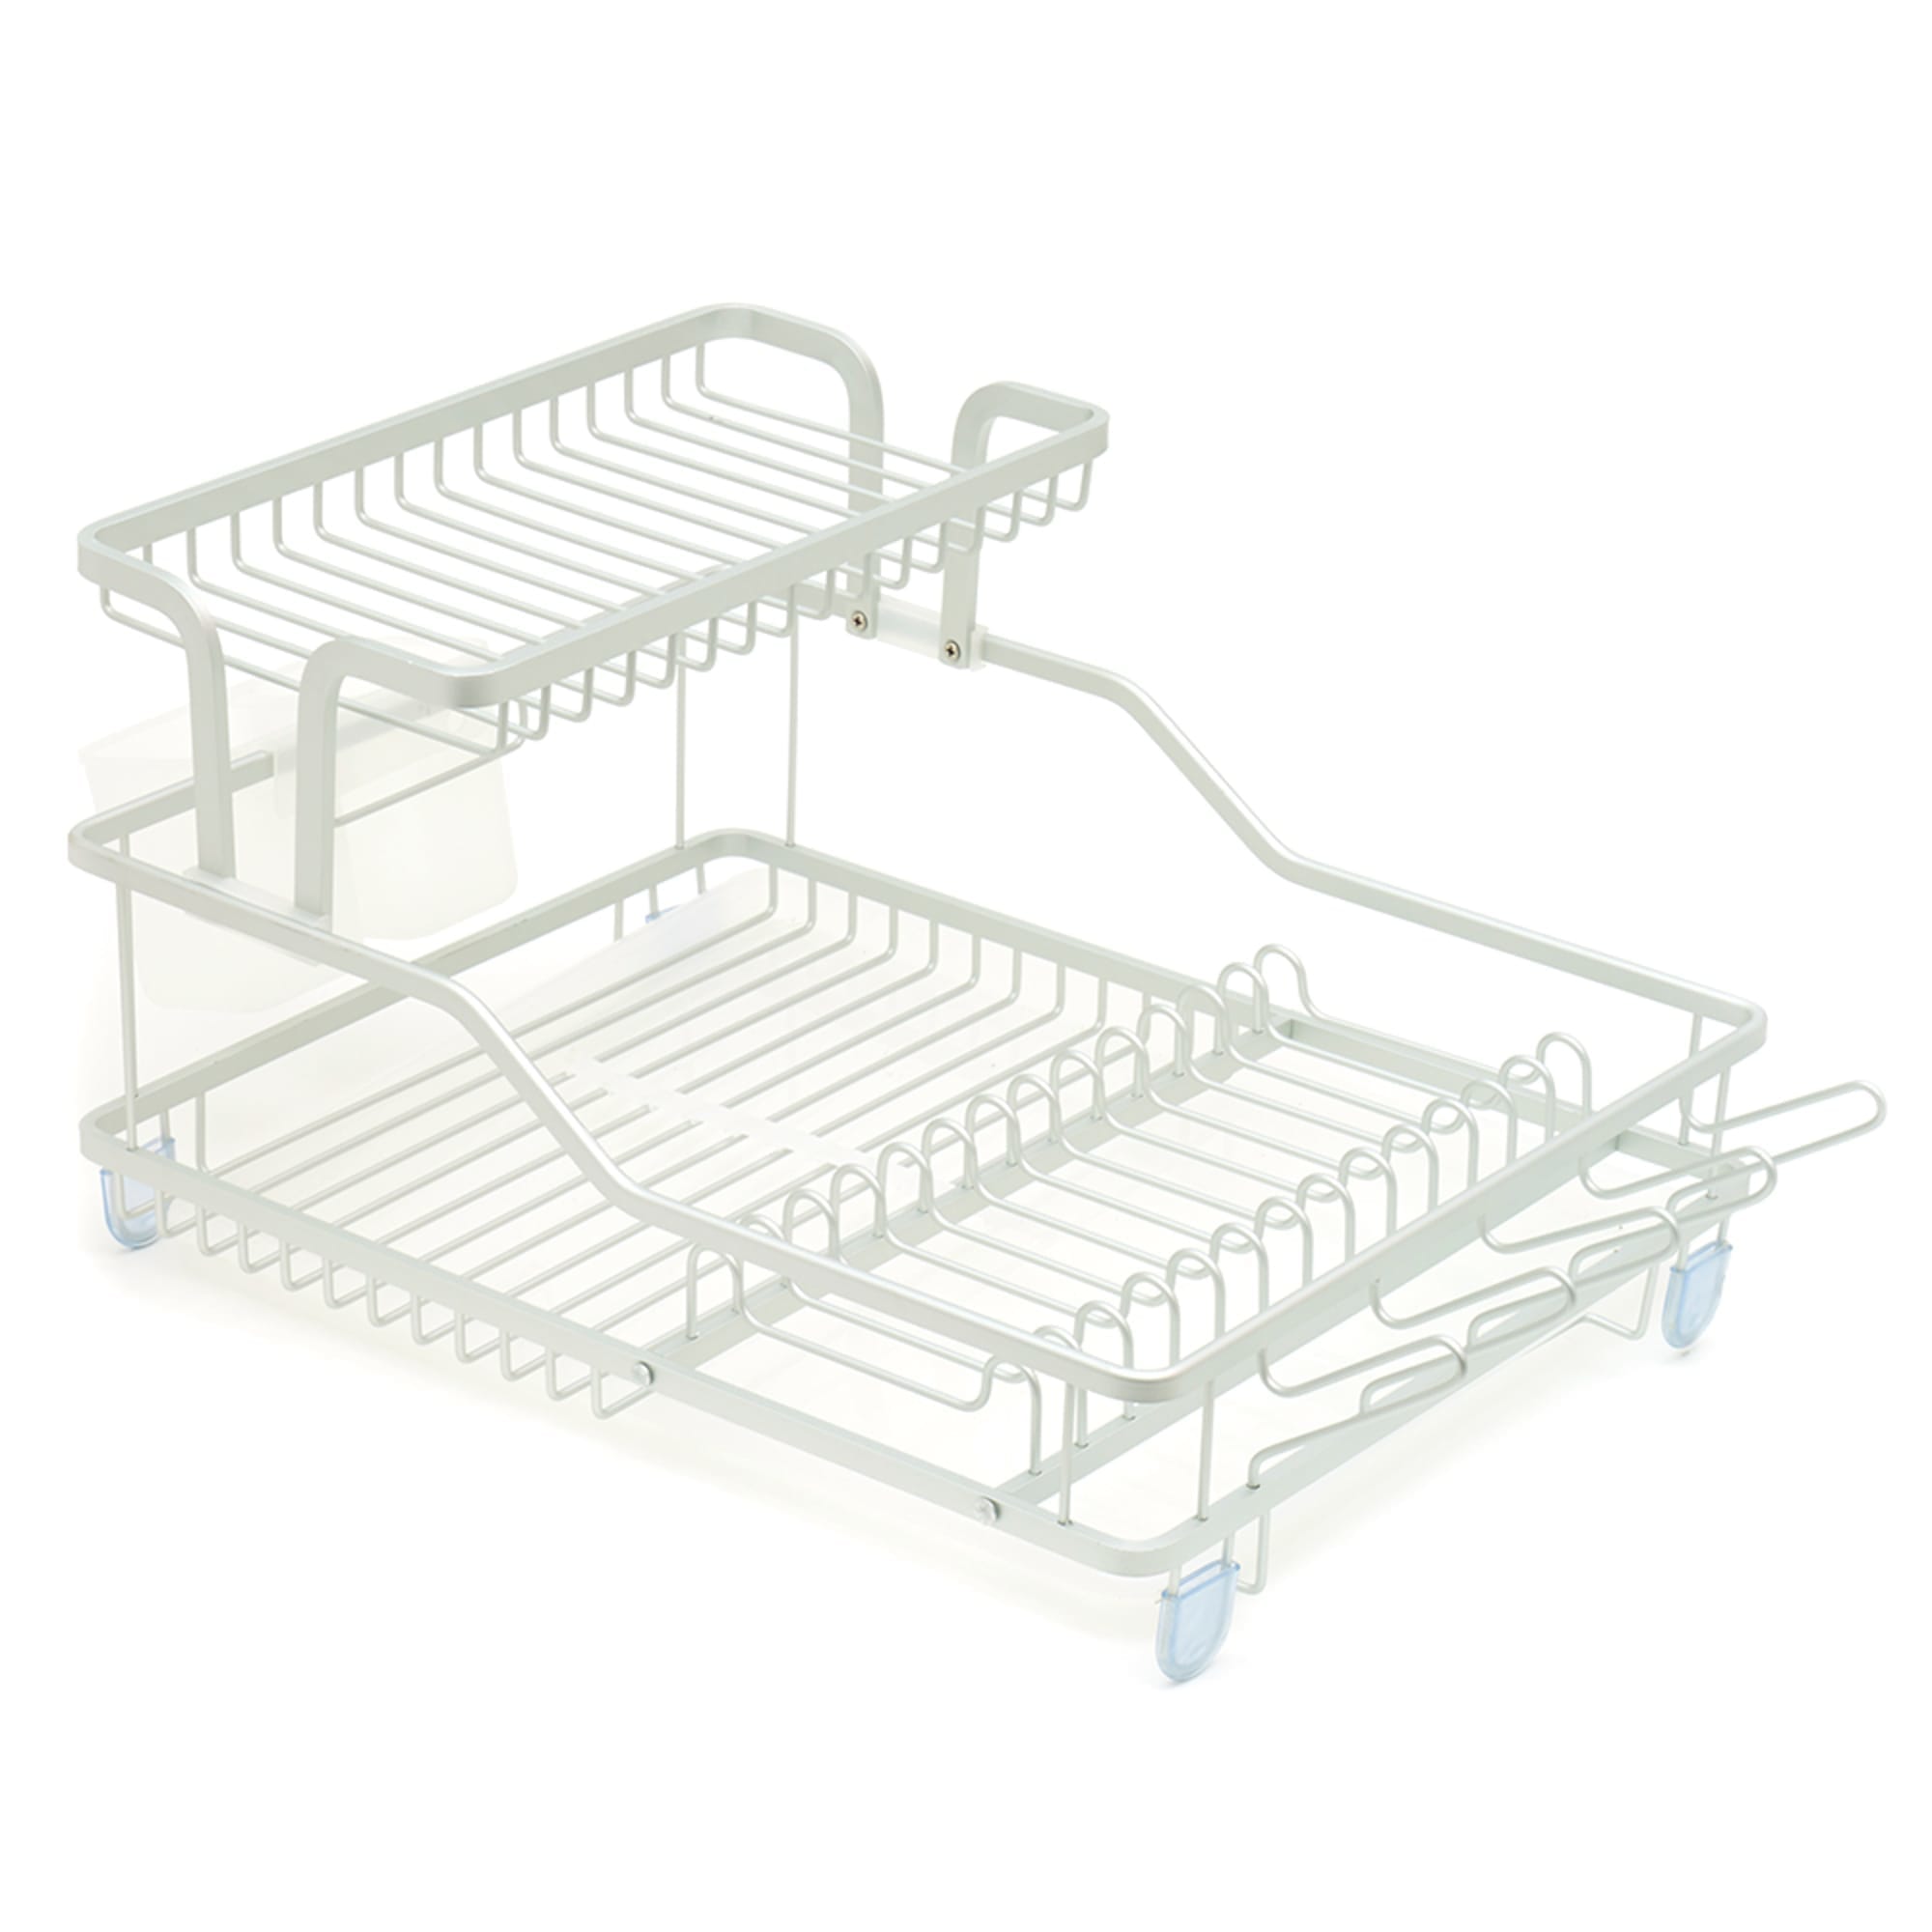 Michael Graves Elevated 2 Tier Dish Rack with Dual Compartment Utensil Holder, Grey $40.00 EACH, CASE PACK OF 4